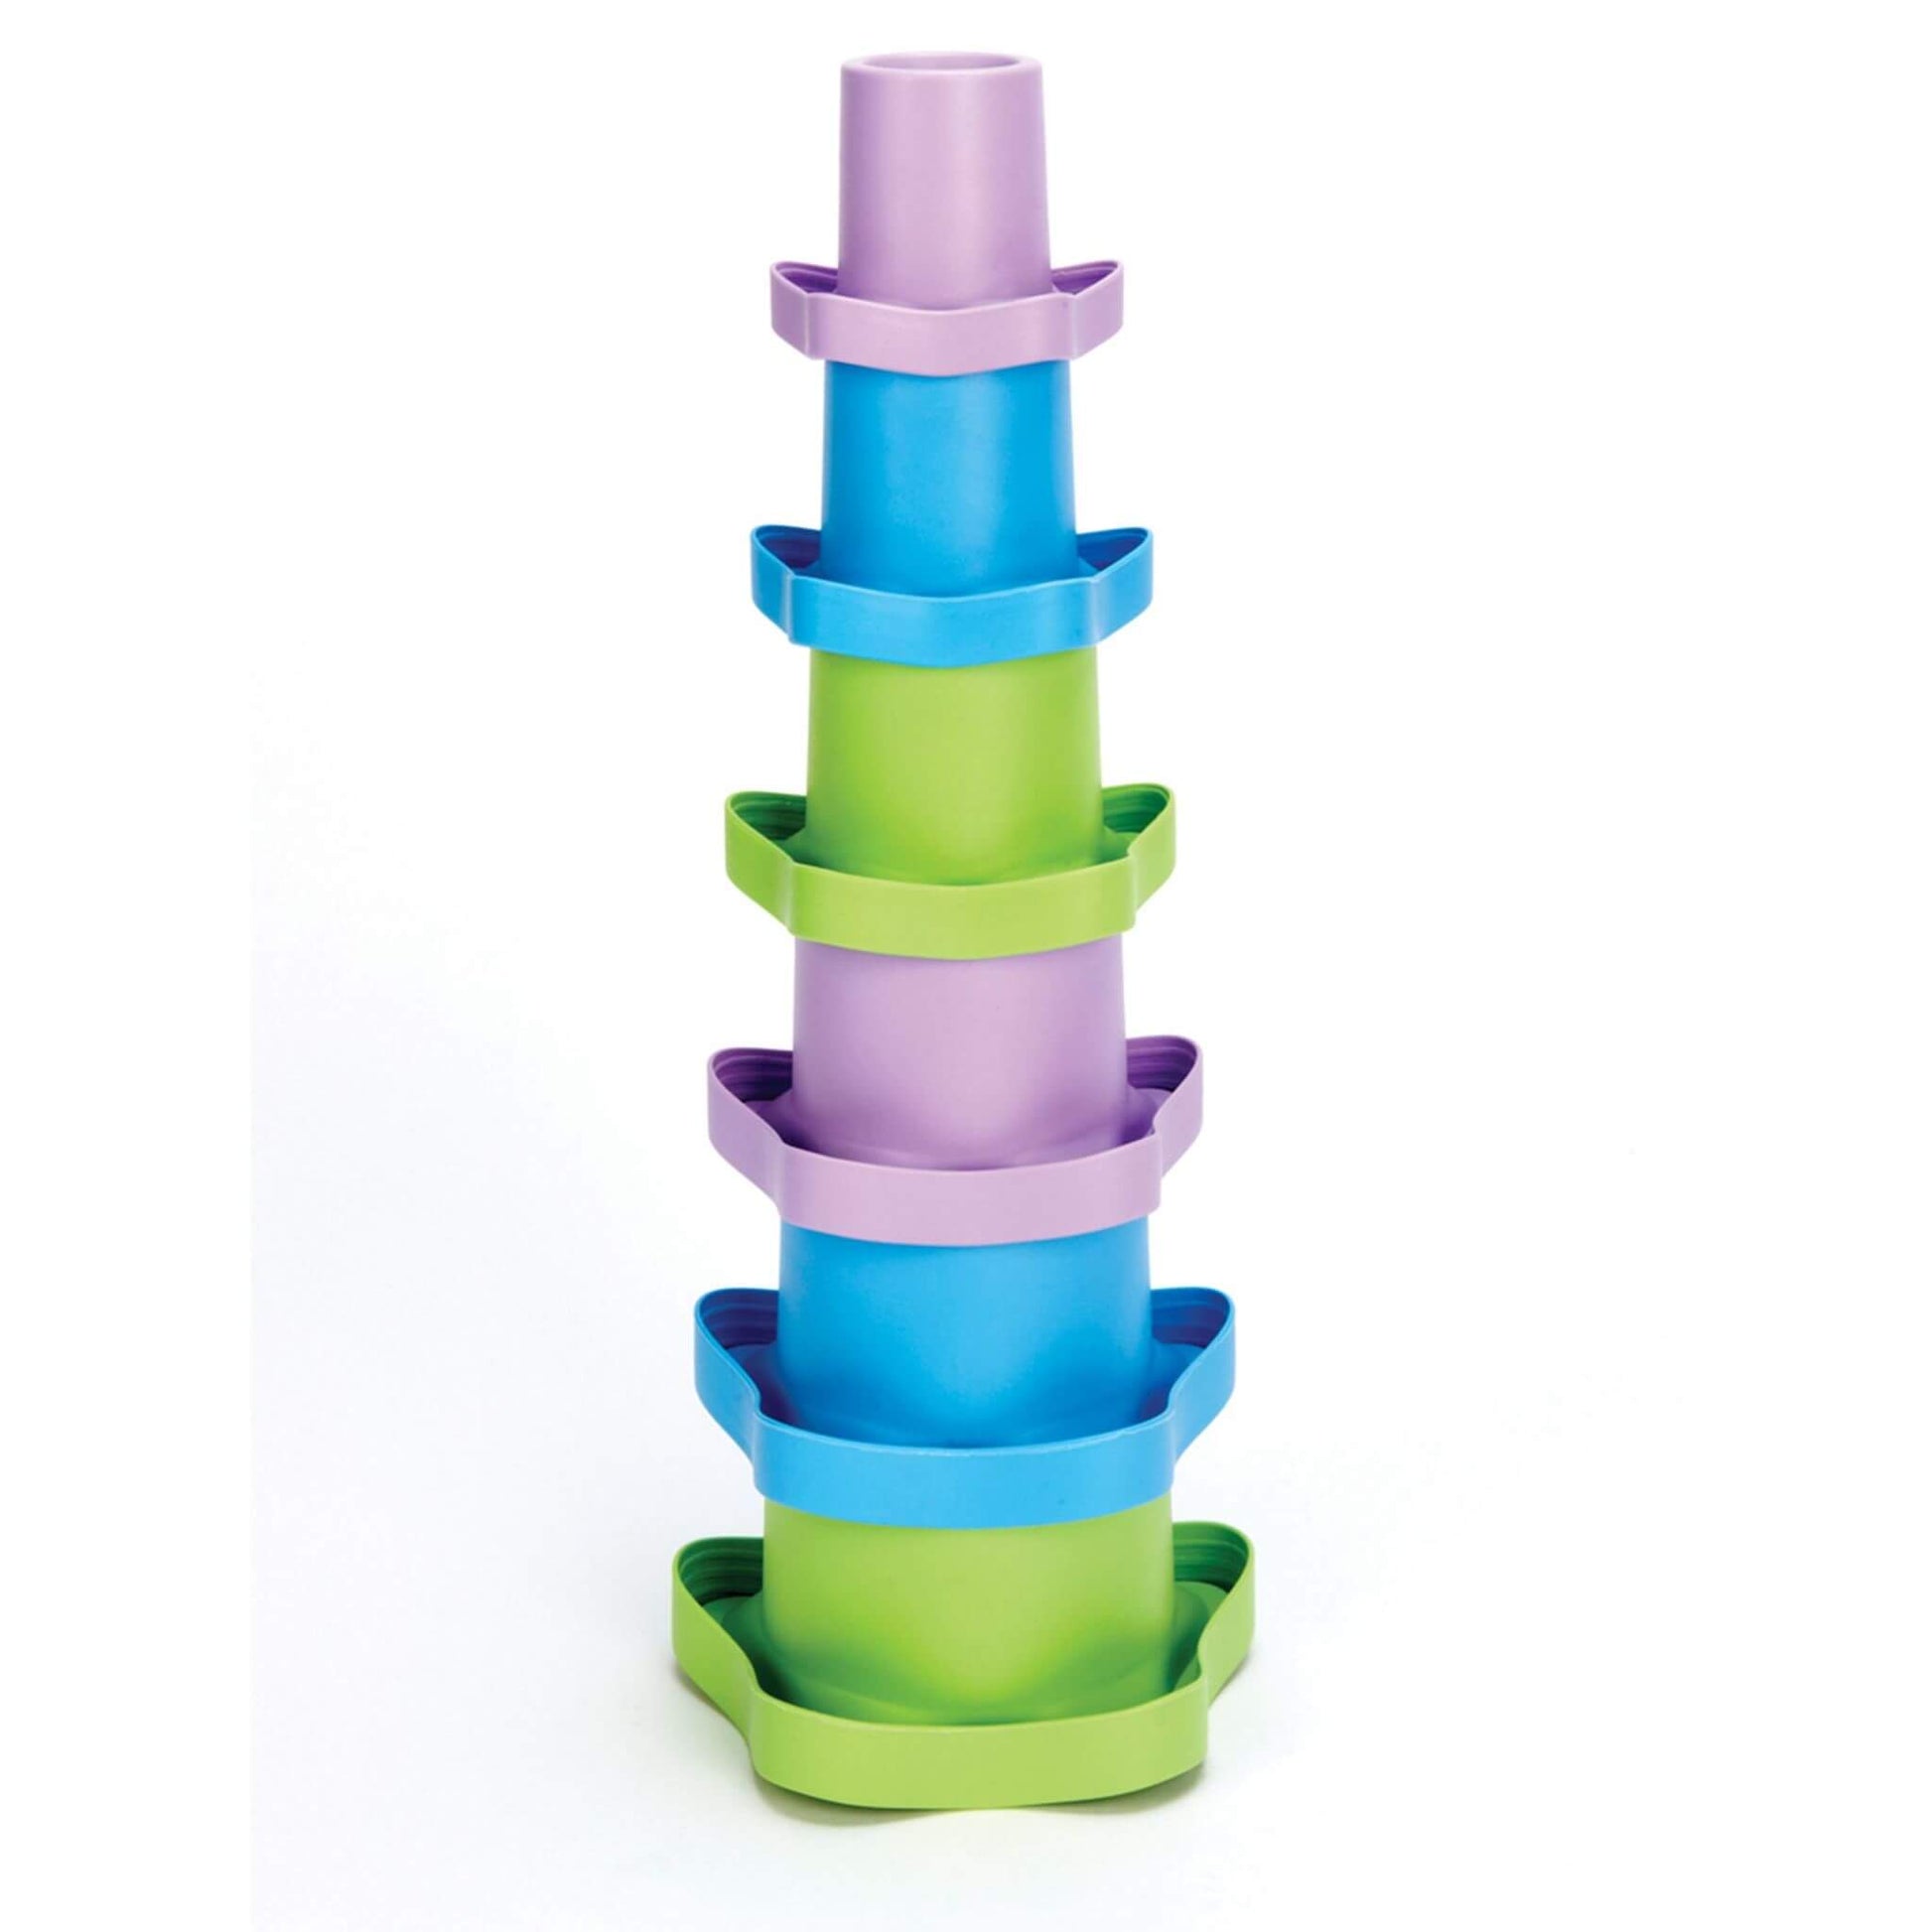 Green Toys Stacking Cups - eco friendly stacking toys made from recycled plastic